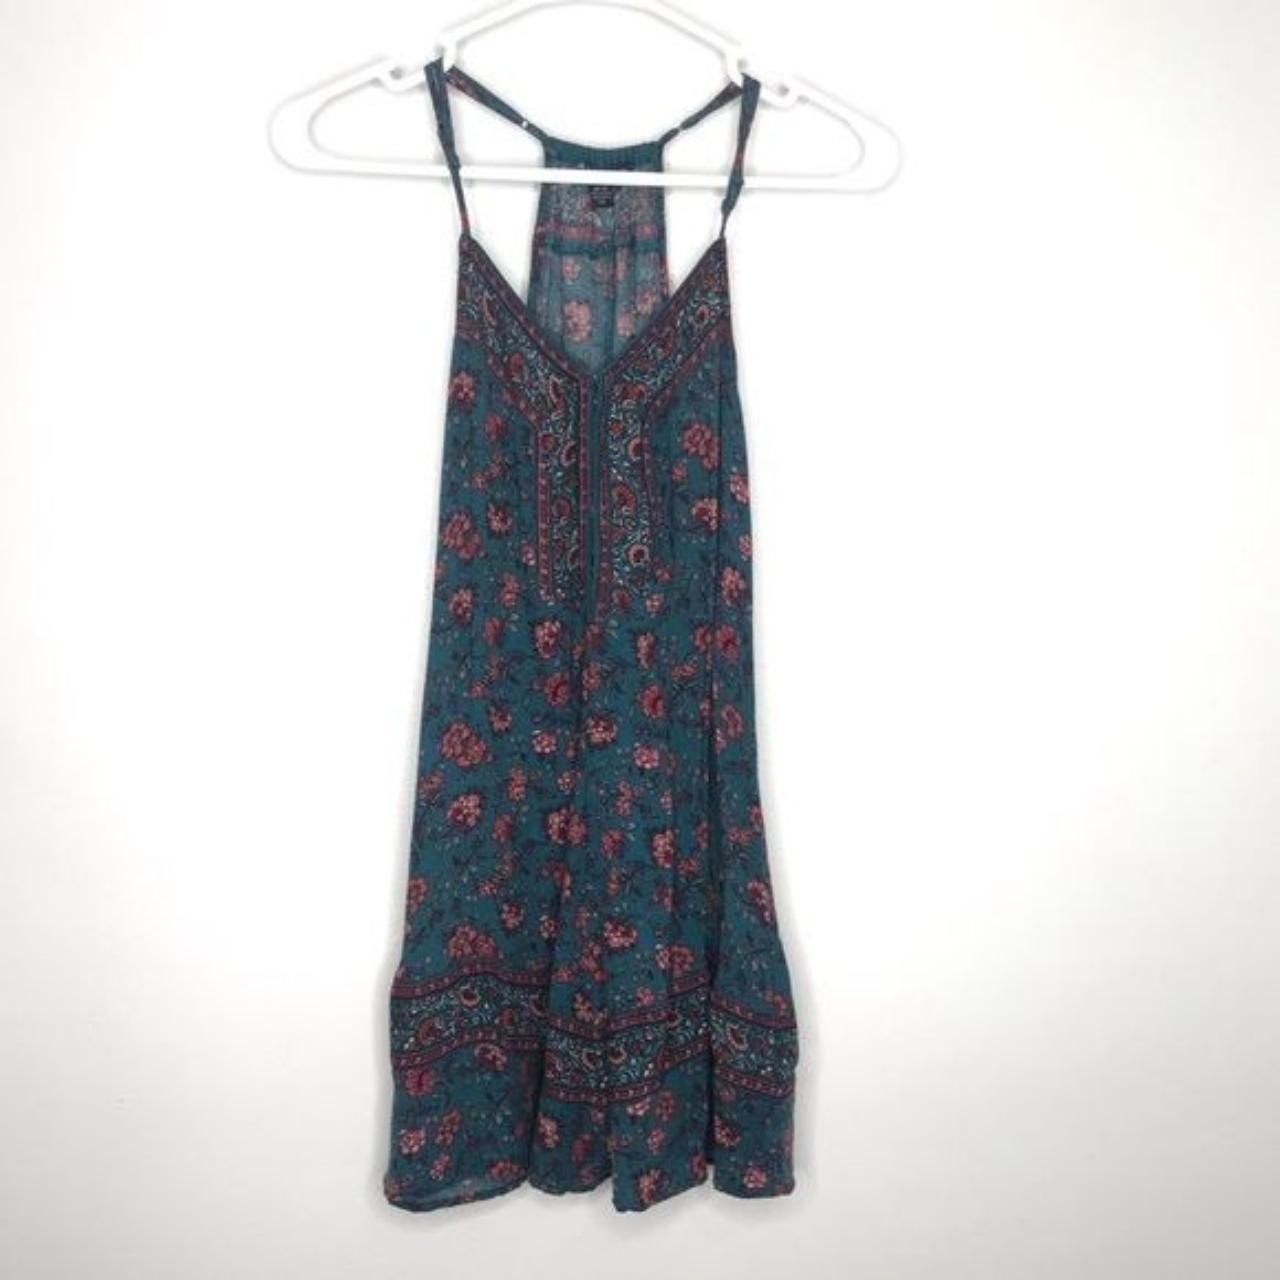 Product Image 1 - American Eagle Floral Shift Dress
Size